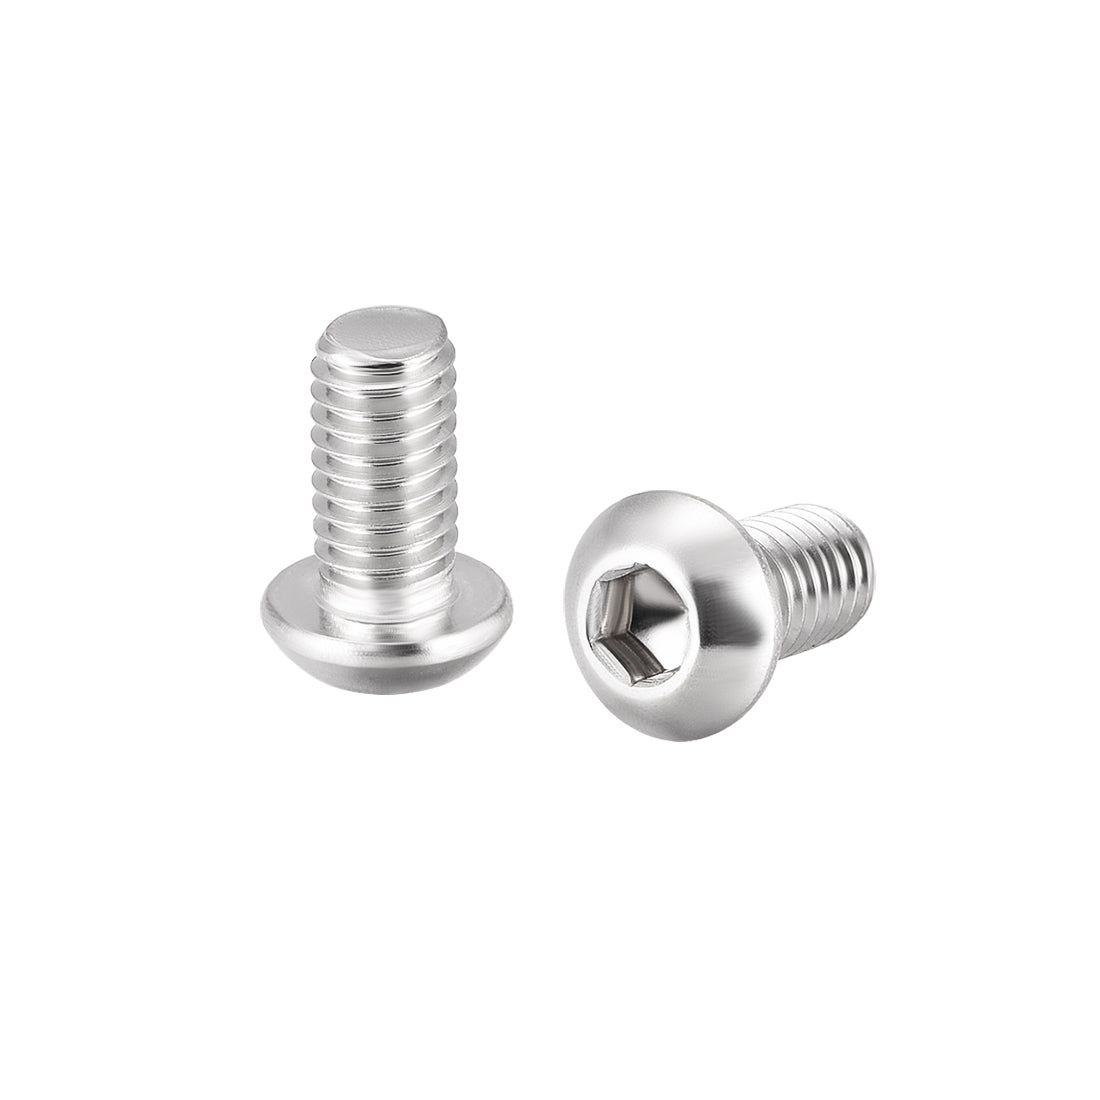 uxcell Uxcell M6x12mm Machine Screws Hex Socket Round Head Screw 304 Stainless Steel Fasteners Bolts 20pcs